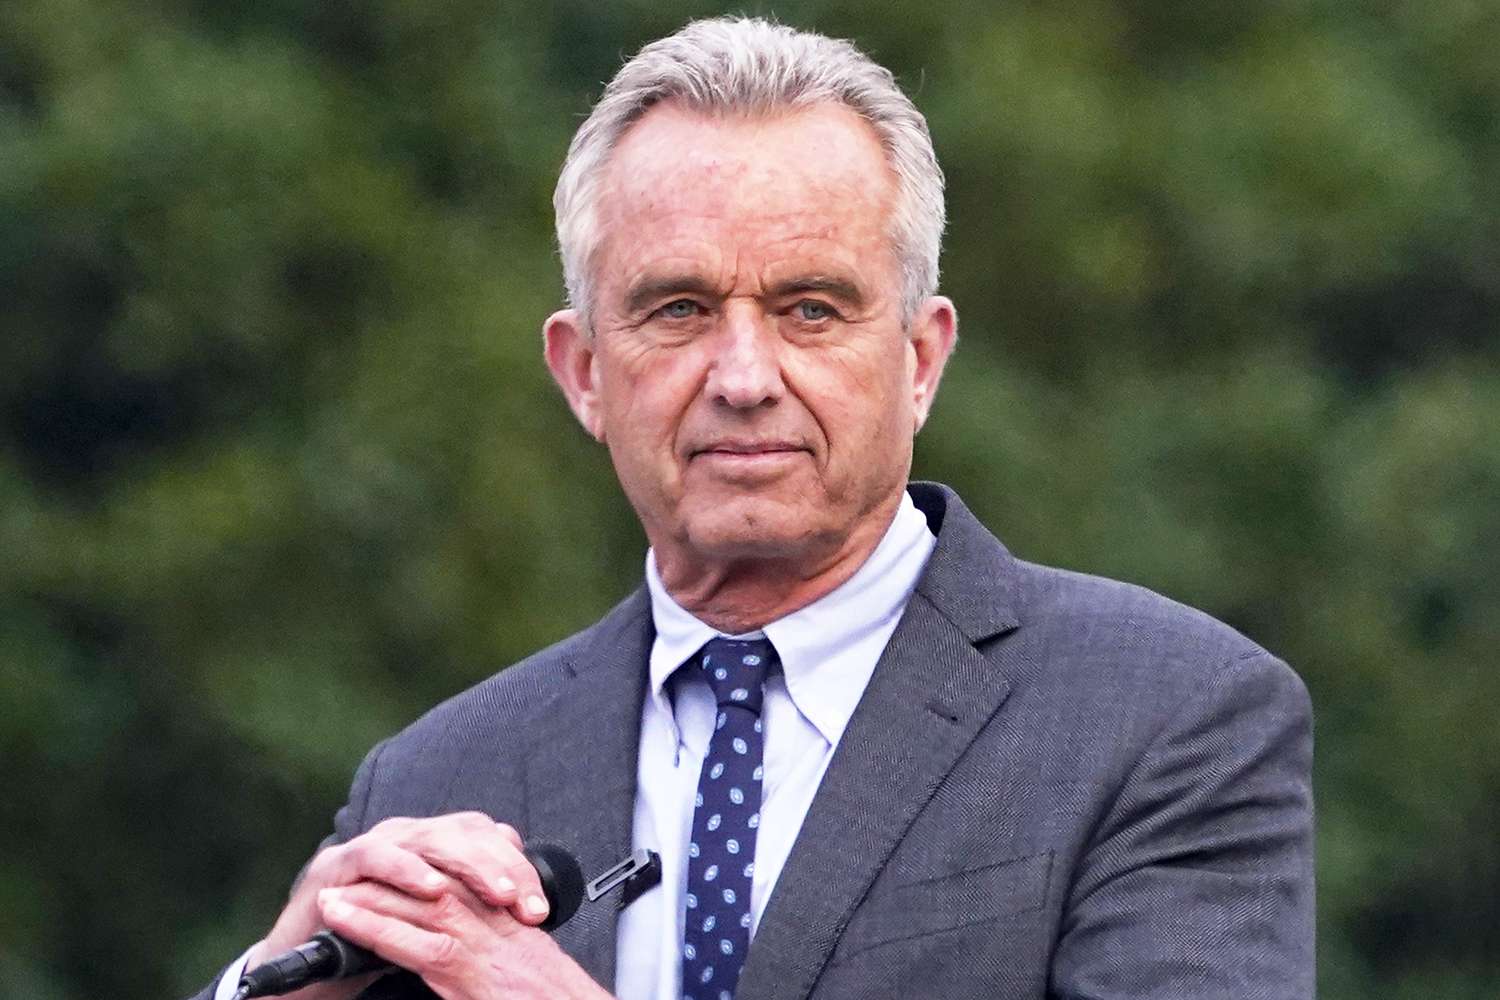 RFK Jr. Responds To Barefoot Plane Photo Debate, Stands Firm On Baring Toes